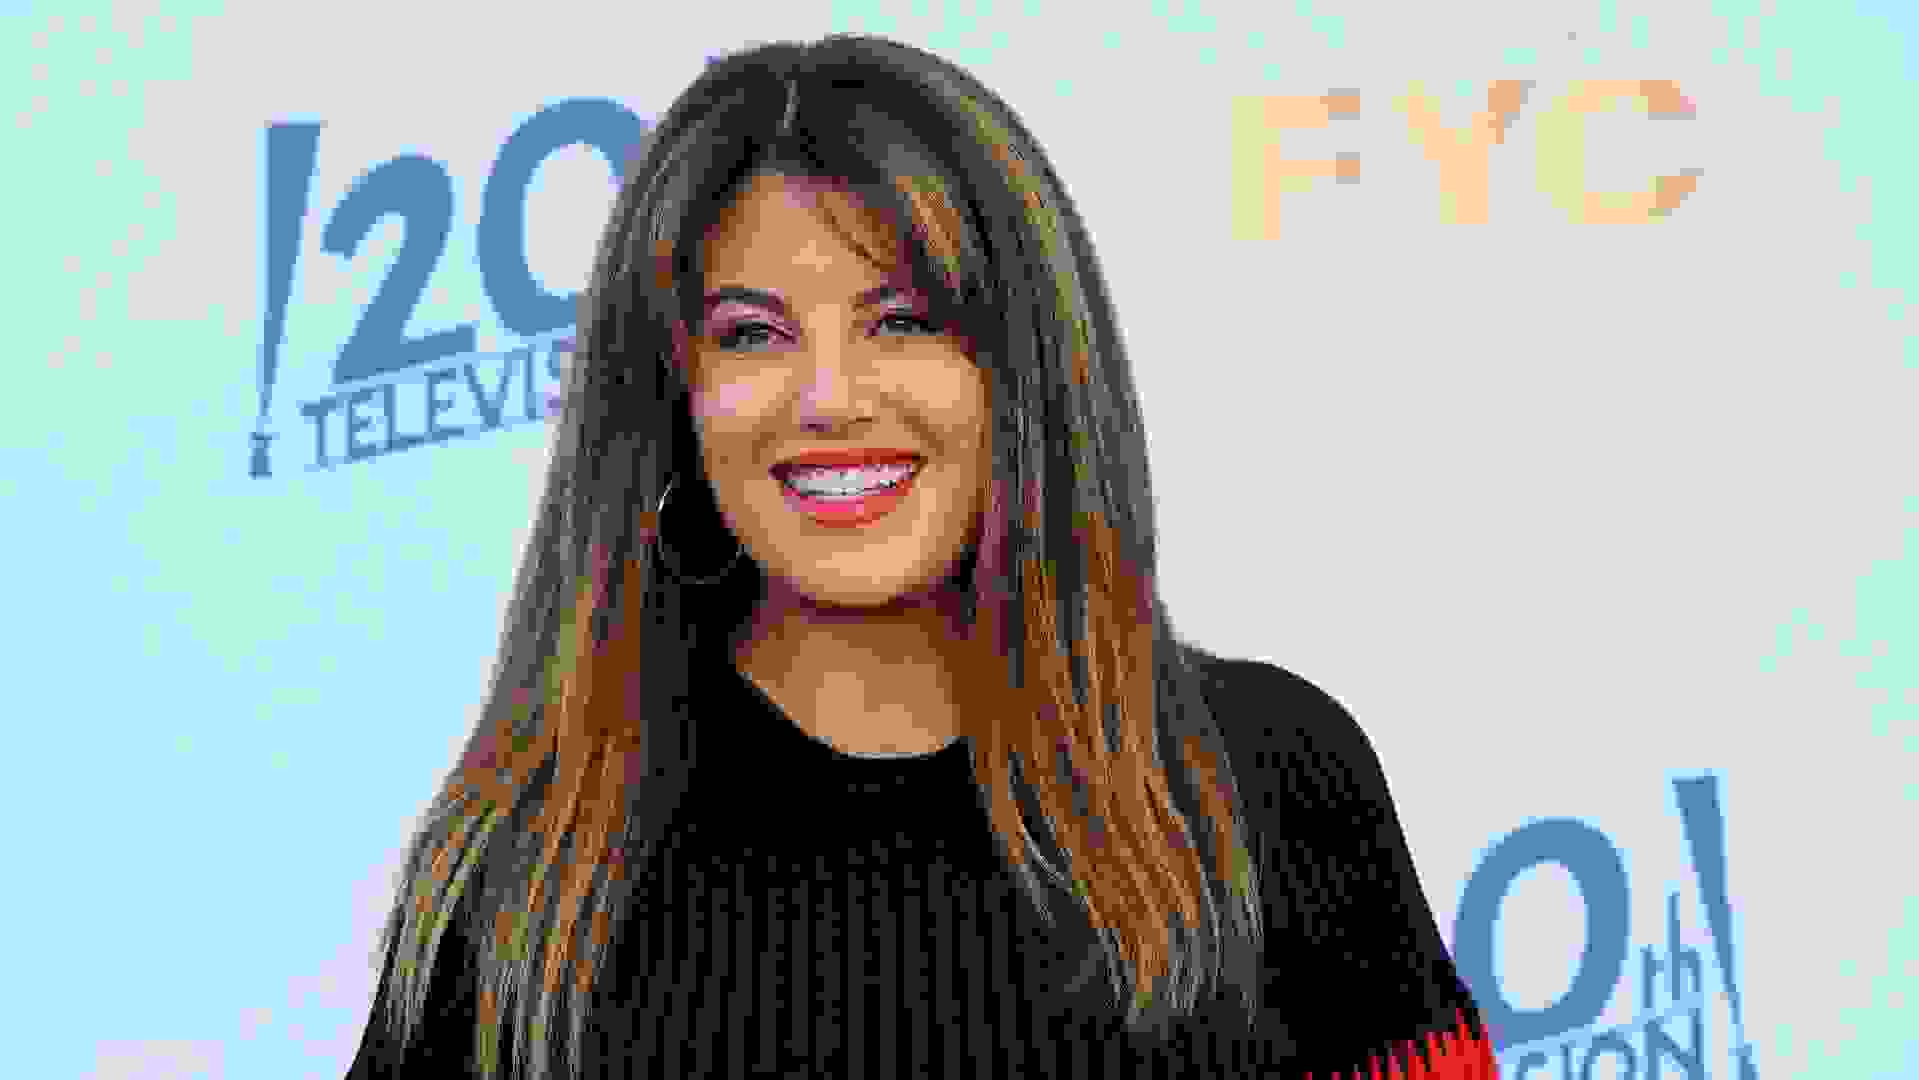 Mandatory Credit: Photo by Chris Pizzello/Invision/AP/Shutterstock (12981090g)Monica Lewinsky poses at a Disney FYC Fest event for the FX limited series "Impeachment: American Crime Story" at El Capitan Theatre, in Los AngelesRed Carpet Event for "Impeachment: American Crime Story", Los Angeles, United States - 10 Jun 2022.